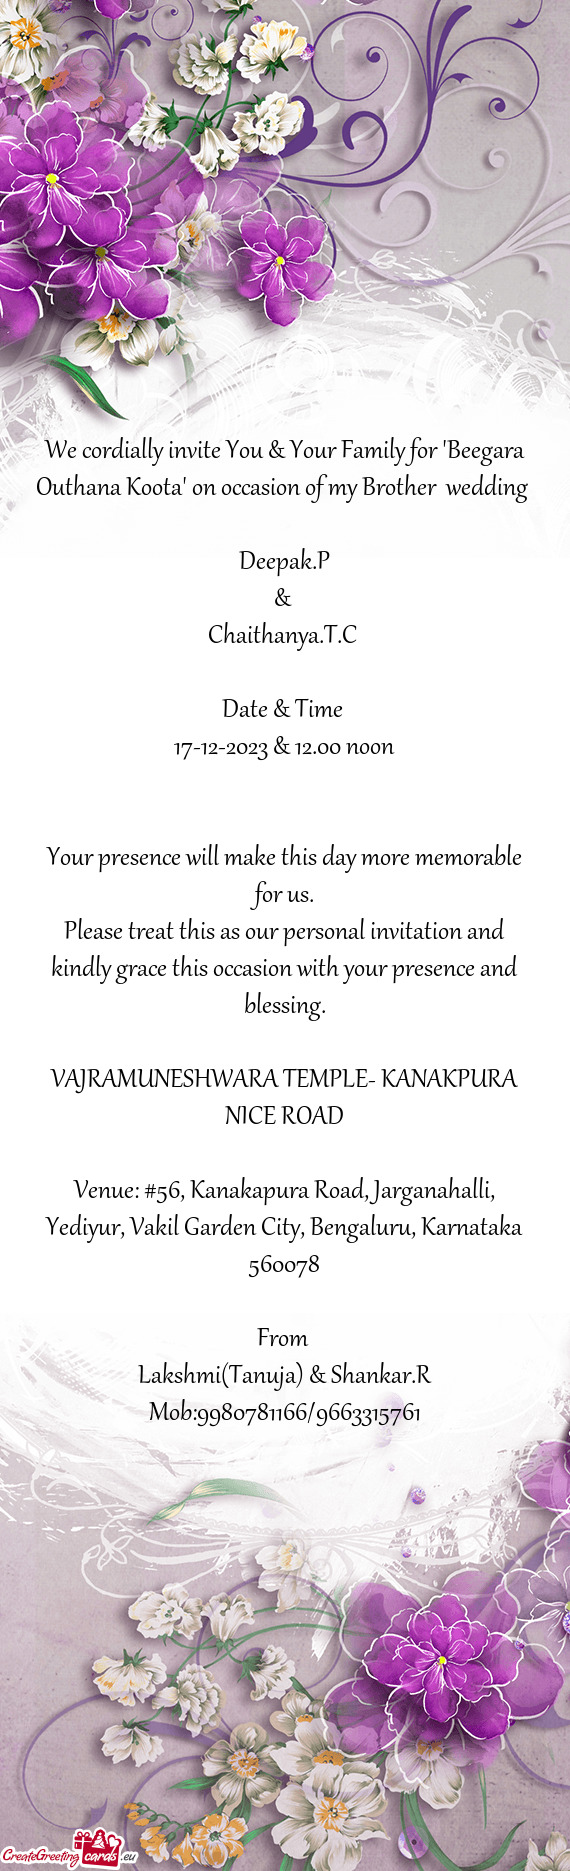 We cordially invite You & Your Family for "Beegara Outhana Koota" on occasion of my Brother wedding